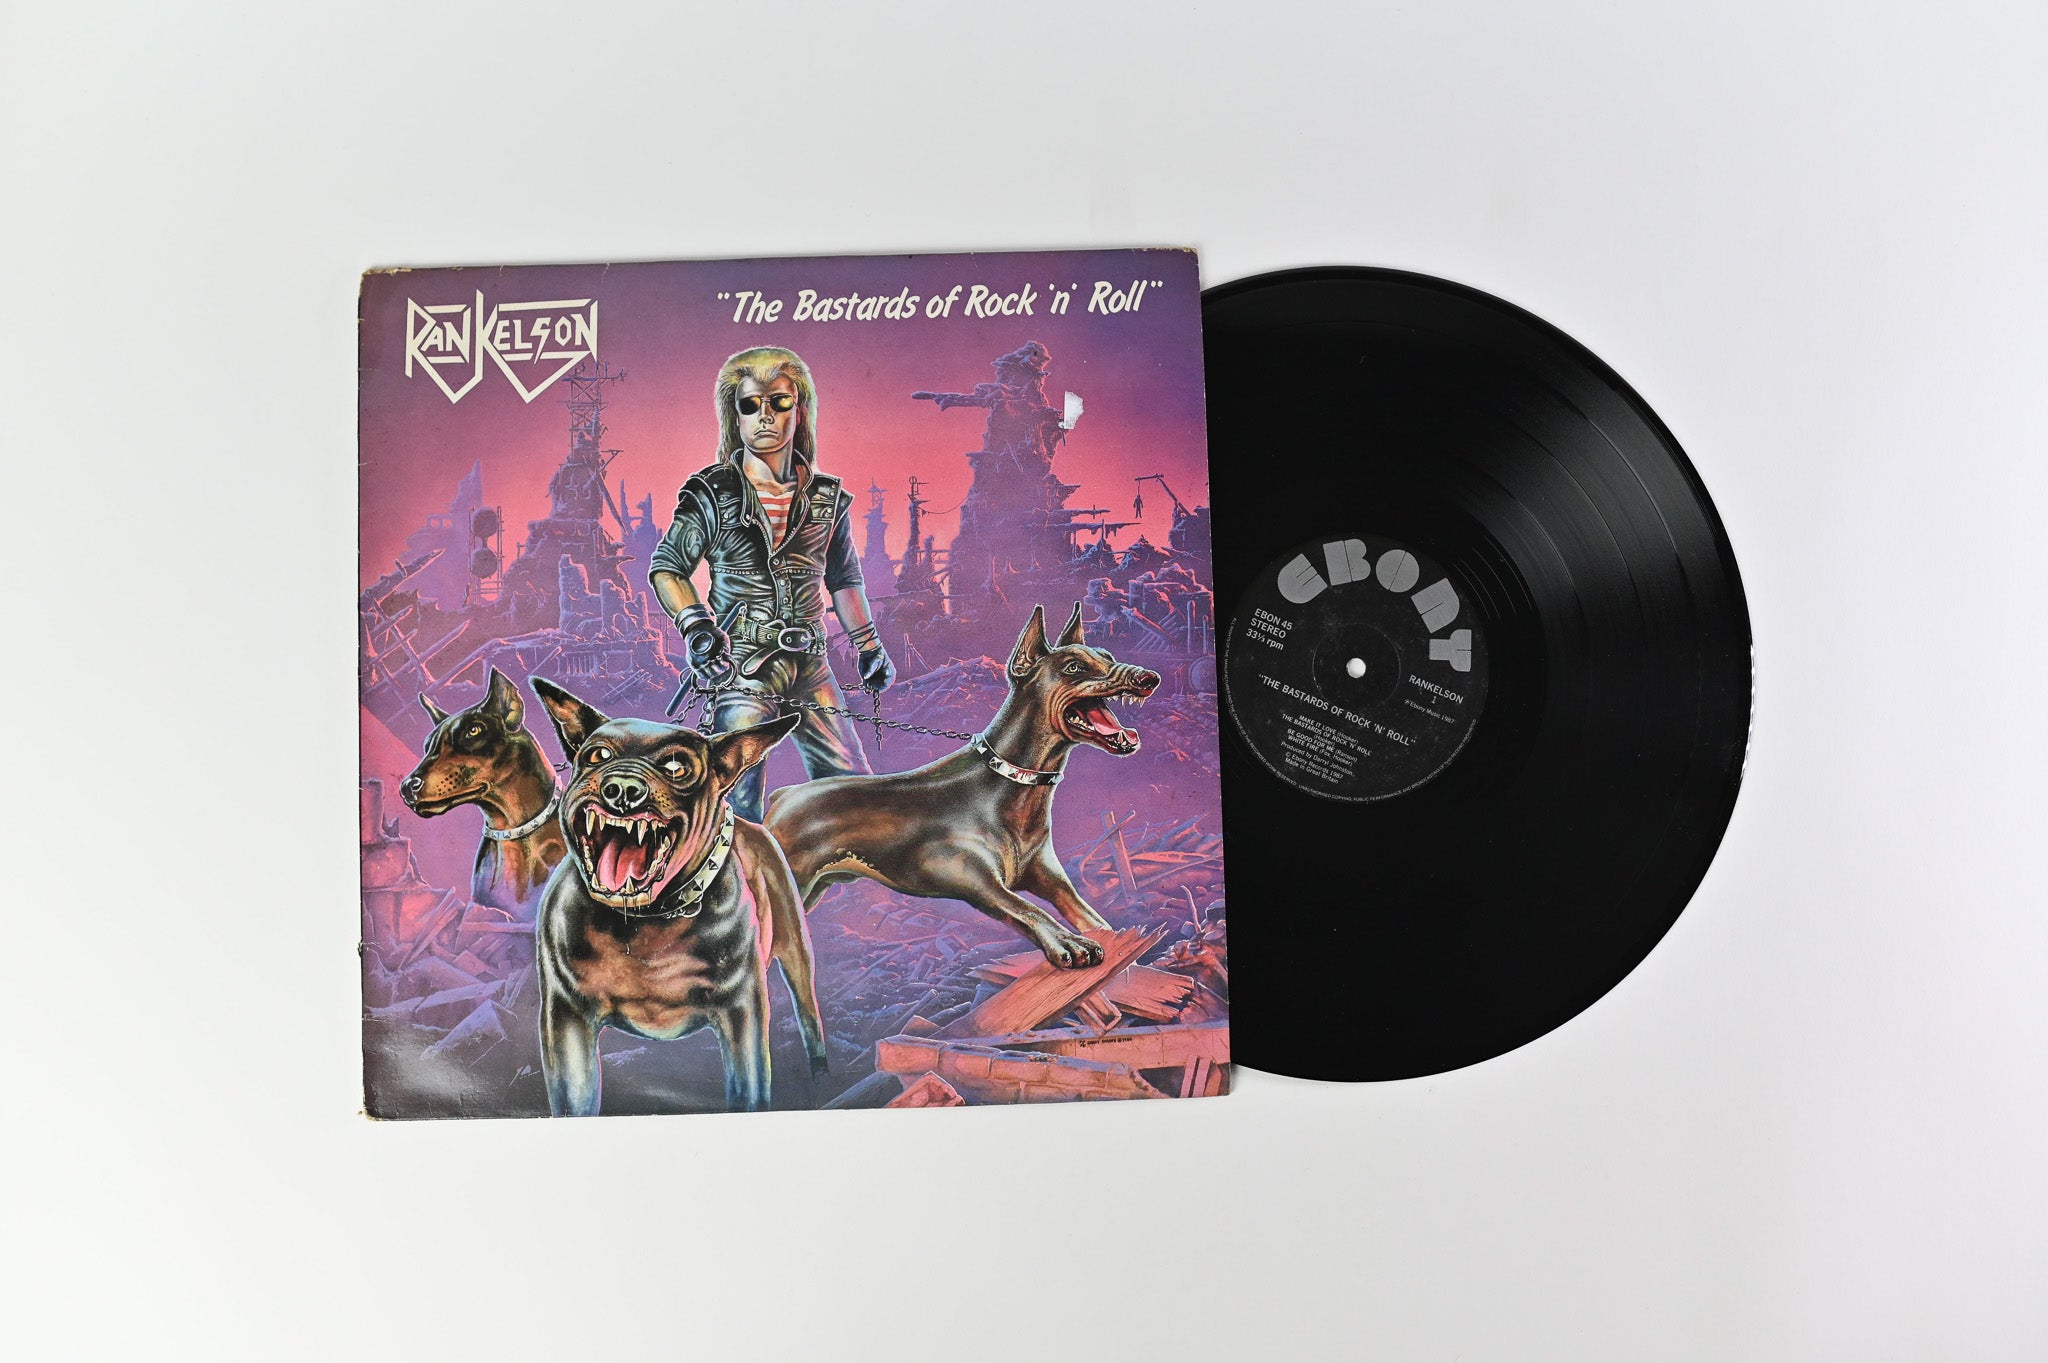 Rankelson - The Bastards Of Rock 'n' Roll on Ebony Records